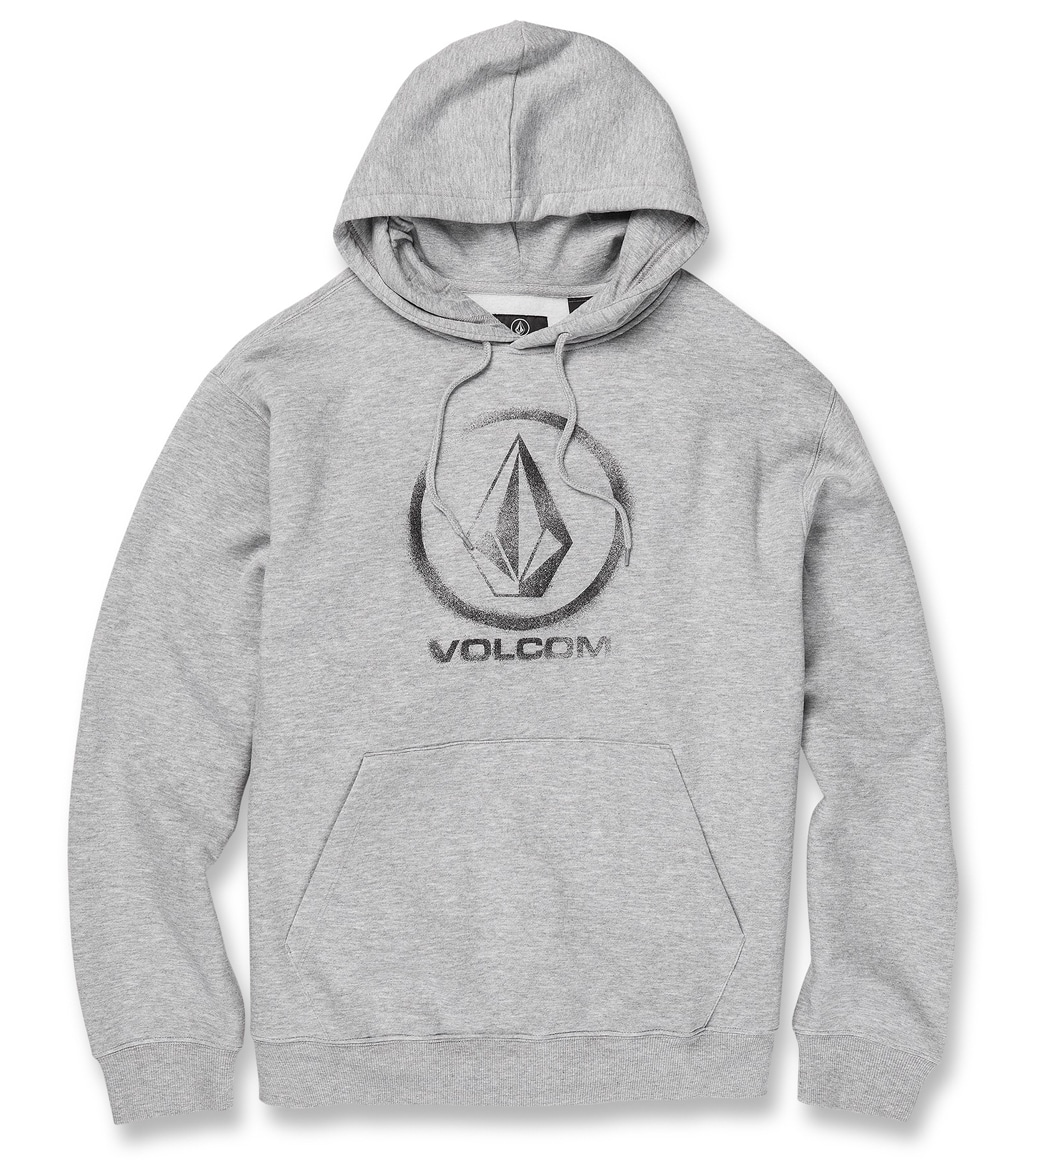 Volcom Men's Catch 91 Pullover Hoodie - Heather Grey Large Cotton/Polyester - Swimoutlet.com